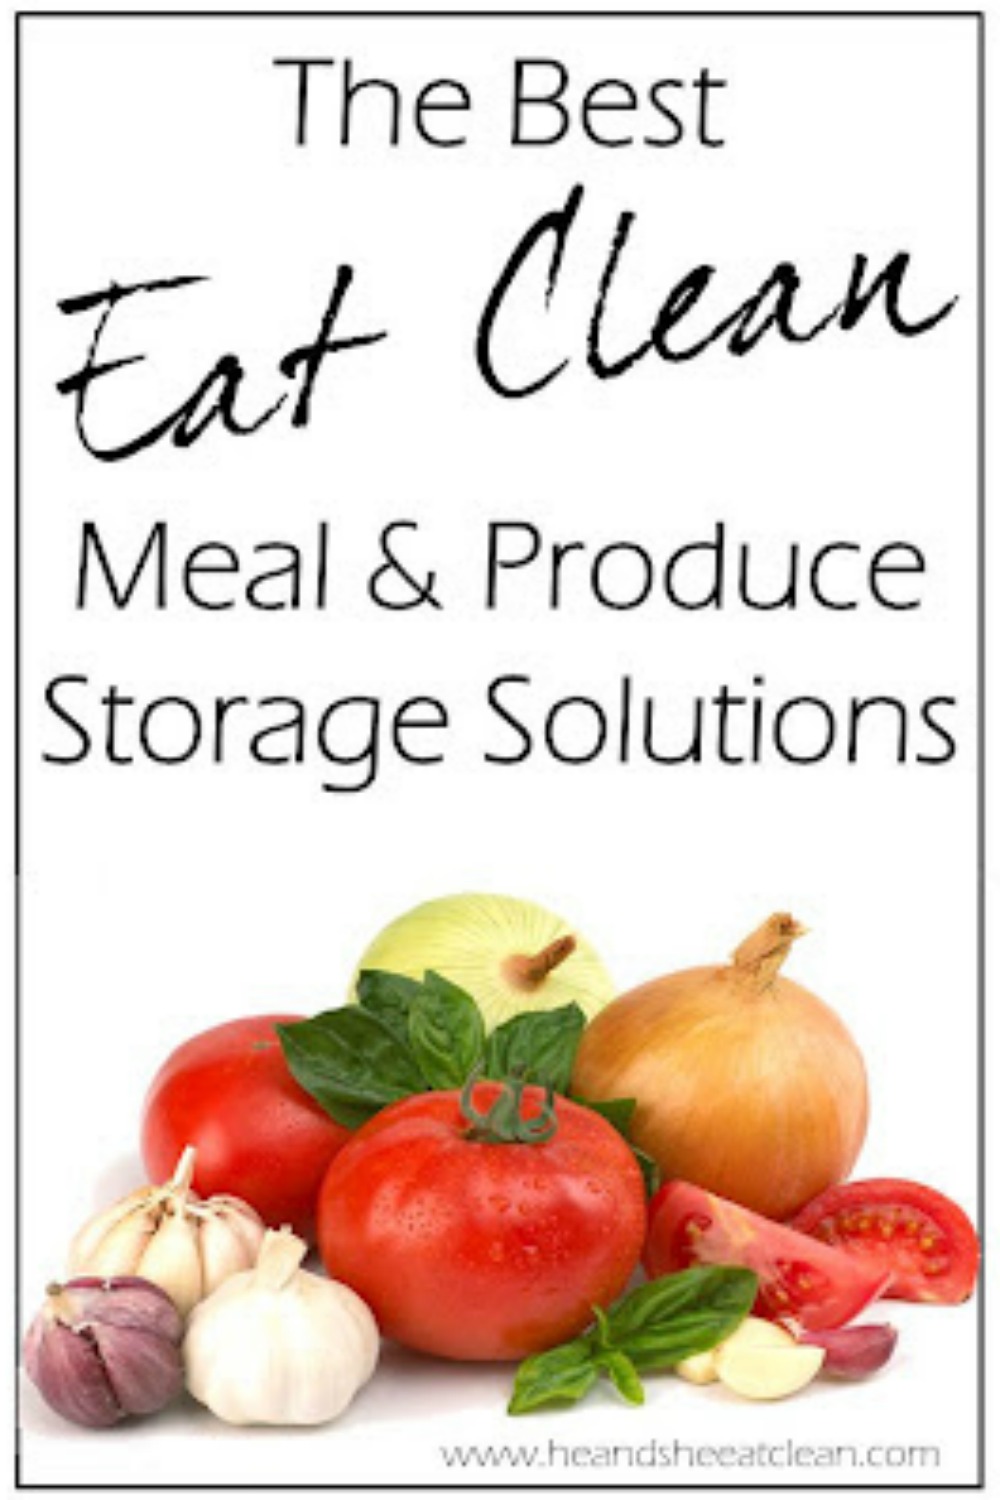 https://www.heandsheeatclean.com/wp-content/uploads/2012/06/the-best-clean-eating-produce-storage-container-solutions-tupperware-ziploc-glasslock-frozen-entree-freezer-meals-food-he-and-she-eat-clean-2.jpg